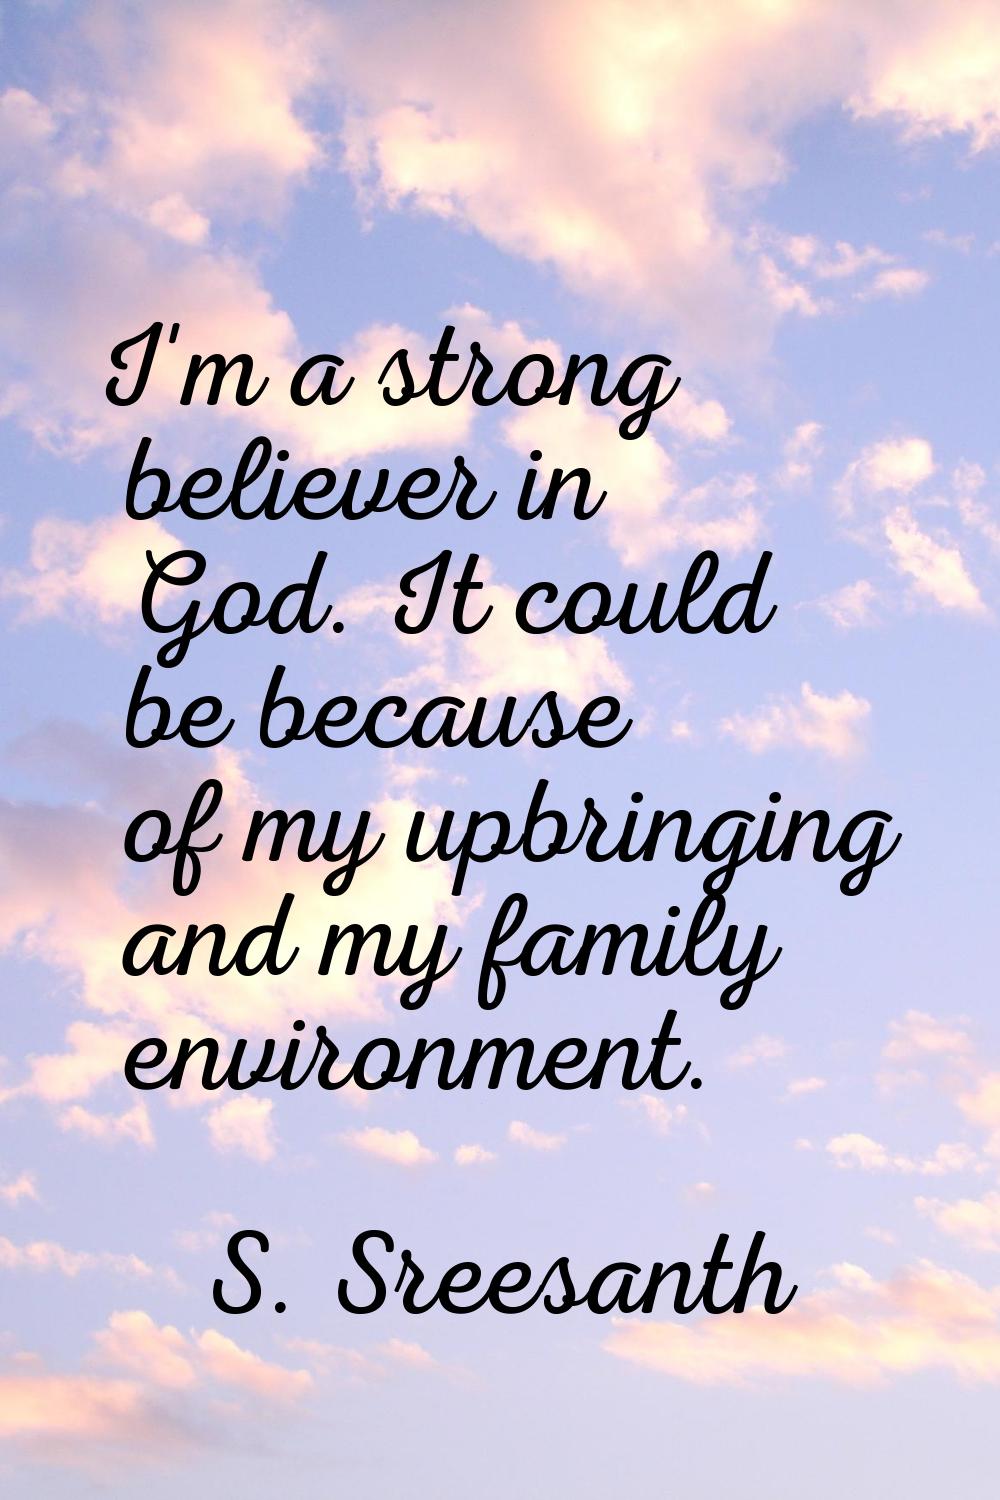 I'm a strong believer in God. It could be because of my upbringing and my family environment.